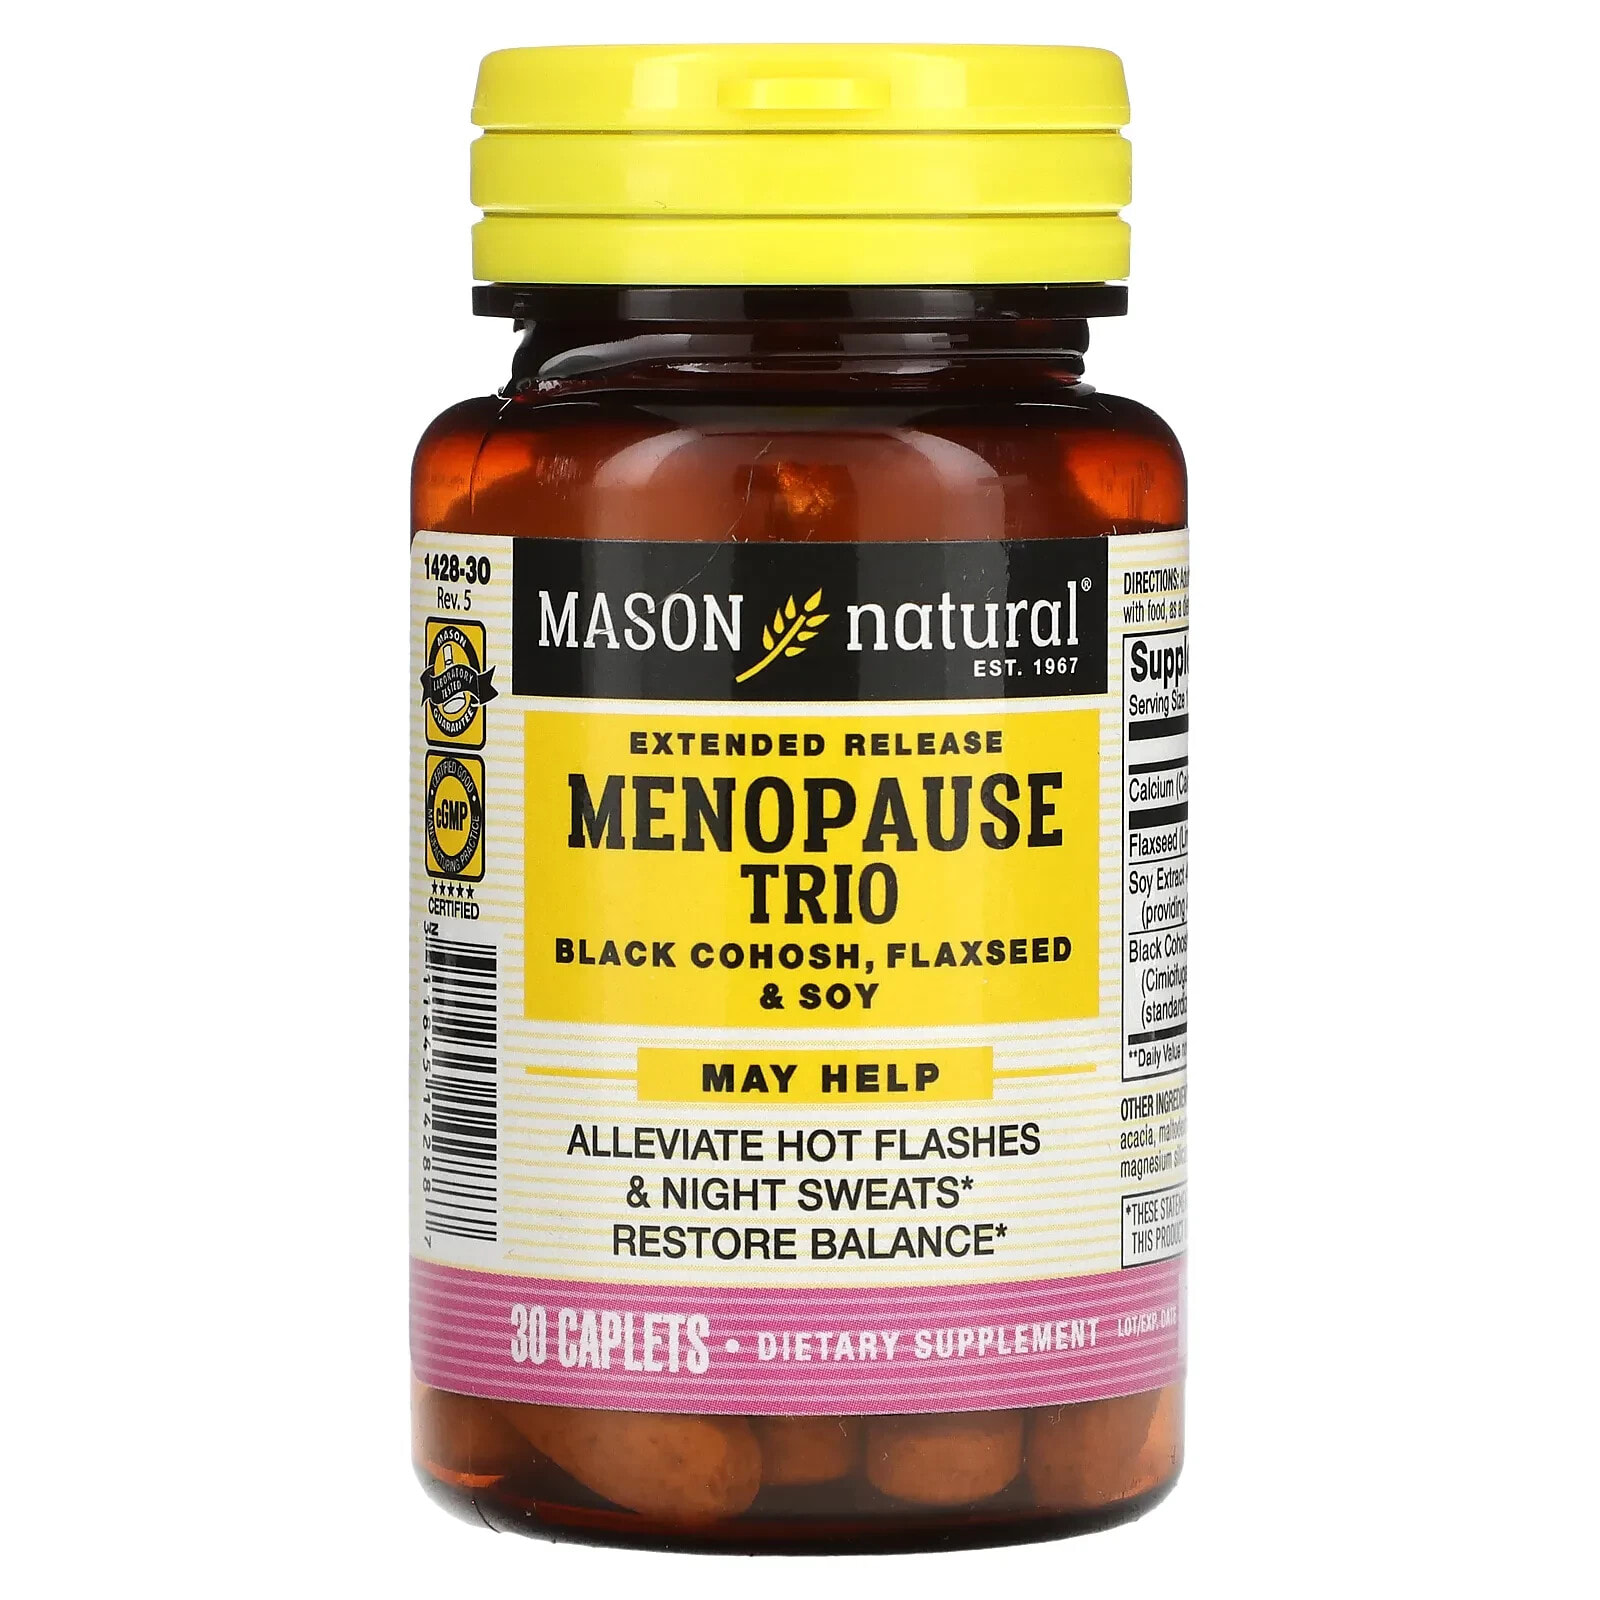 Mason Natural, Extended Release Menopause Relief Trio, Black Cohosh, Flaxseed and Soy, 30 Caplets